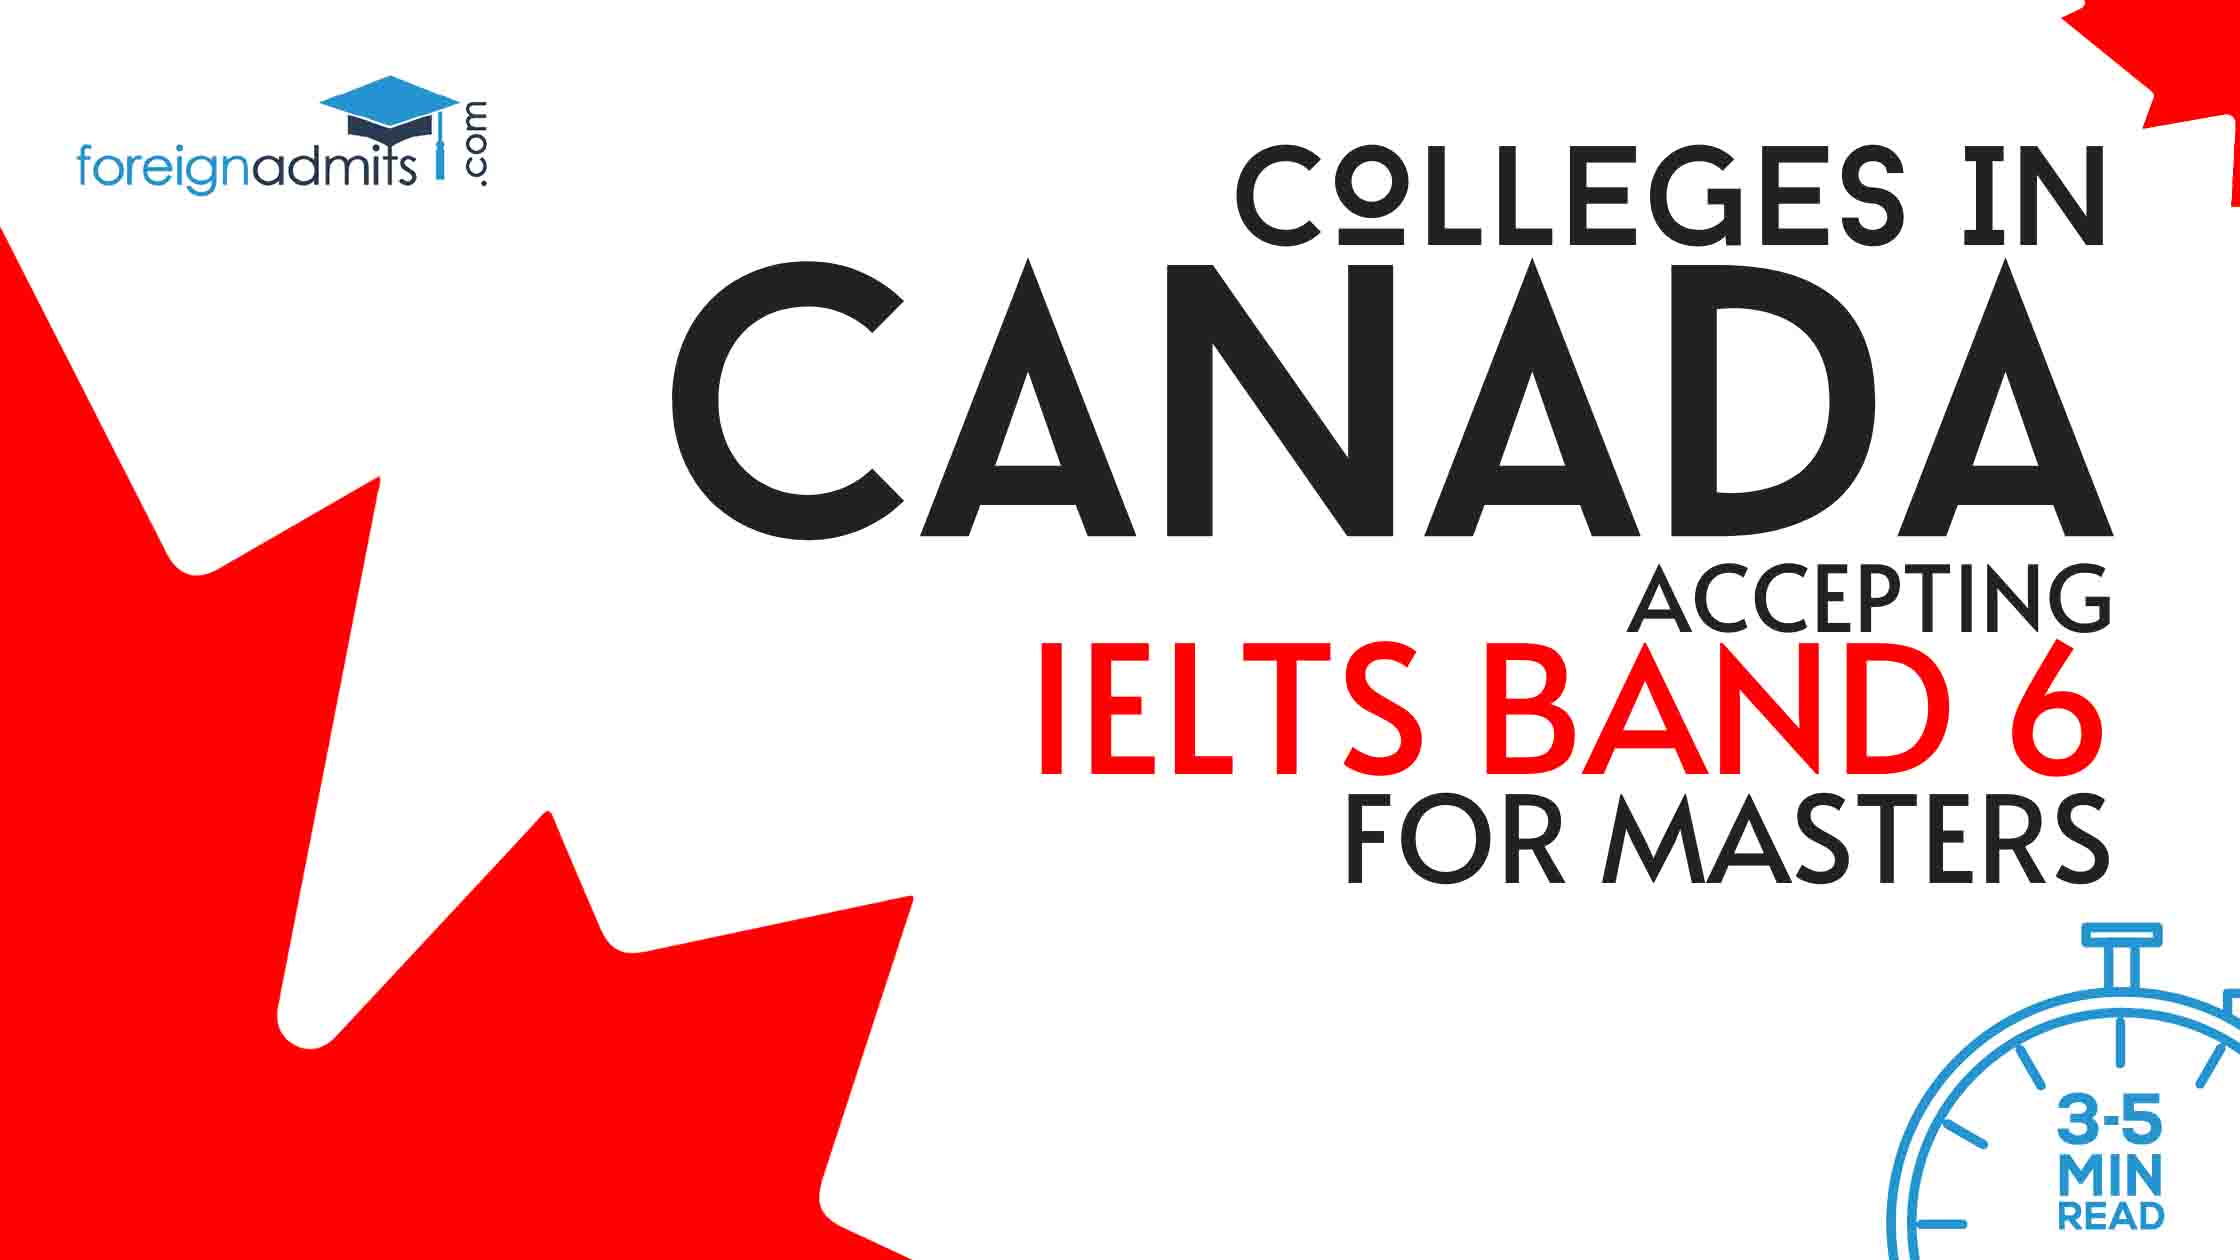 Colleges in Canada Accepting IELTS Band 6 for Masters